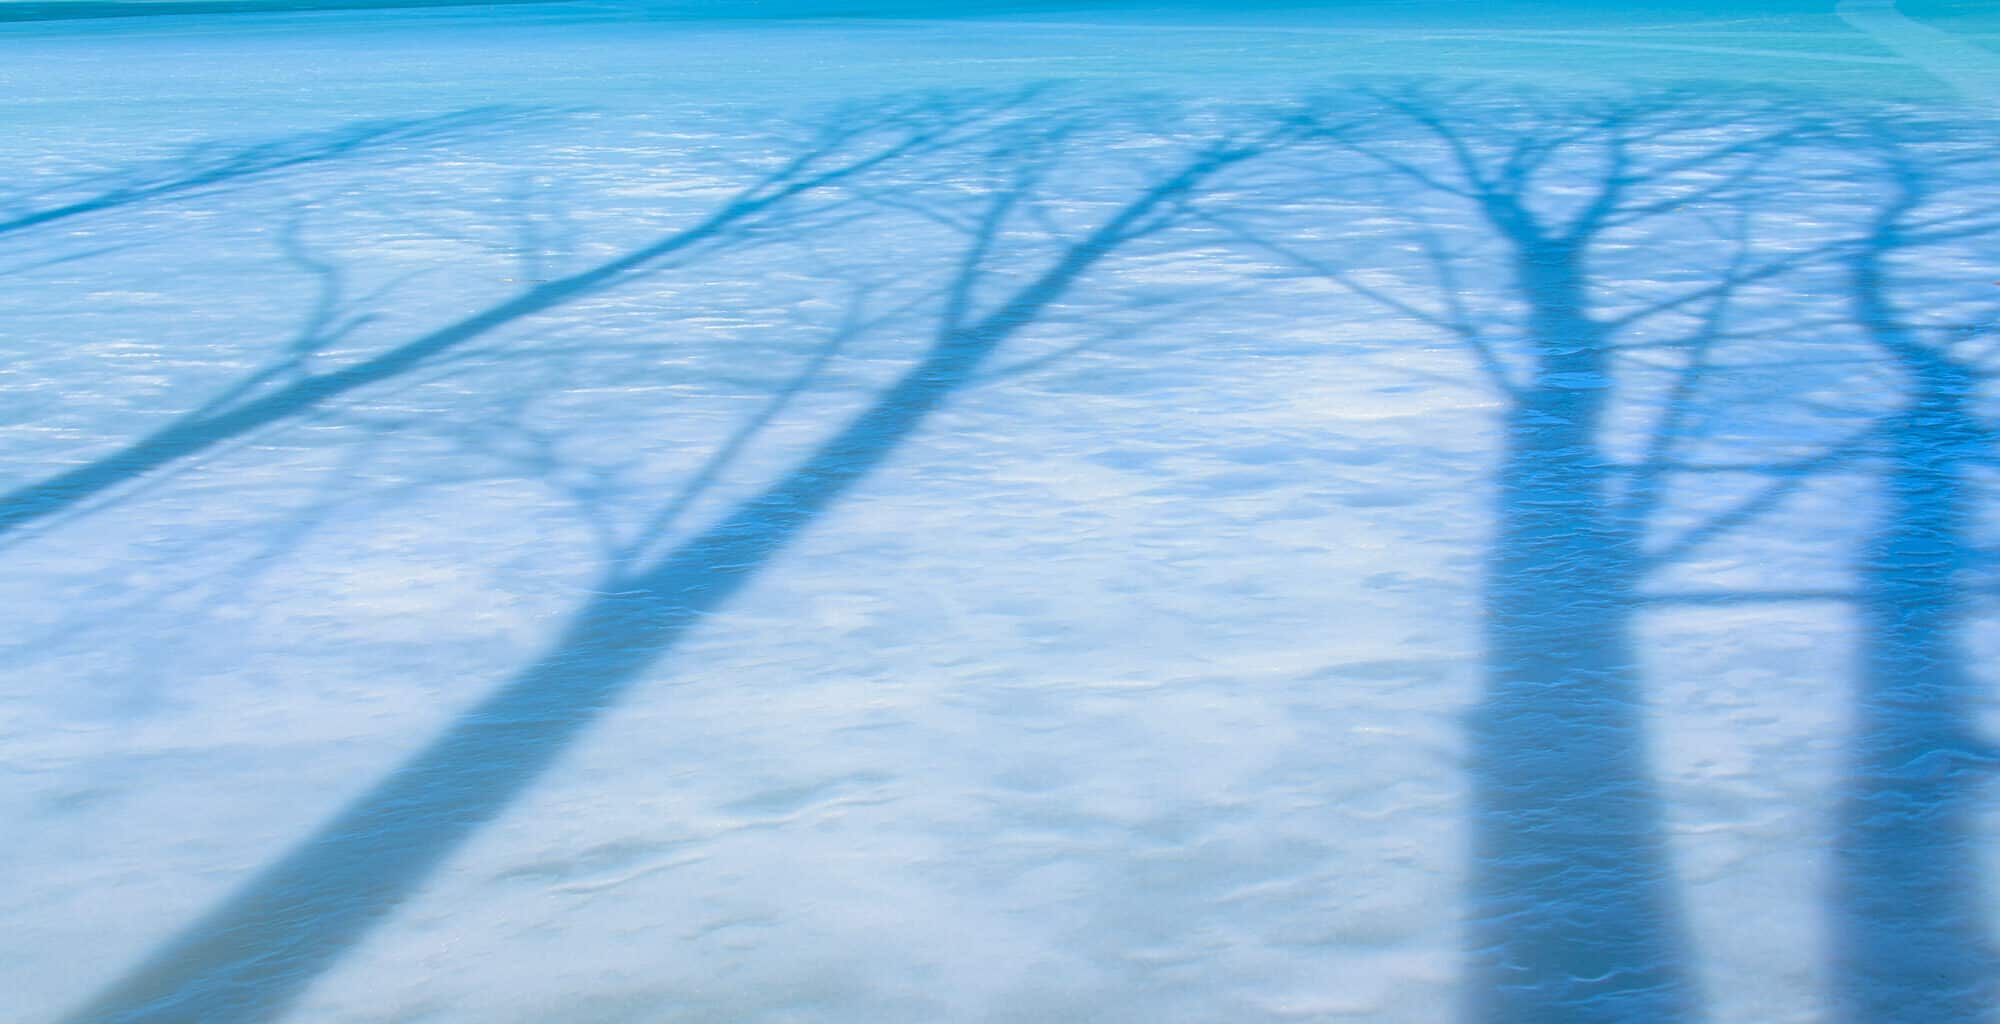 Trees cast a shadow on the icy surface of Coot Lake in Boulder, Colorado.